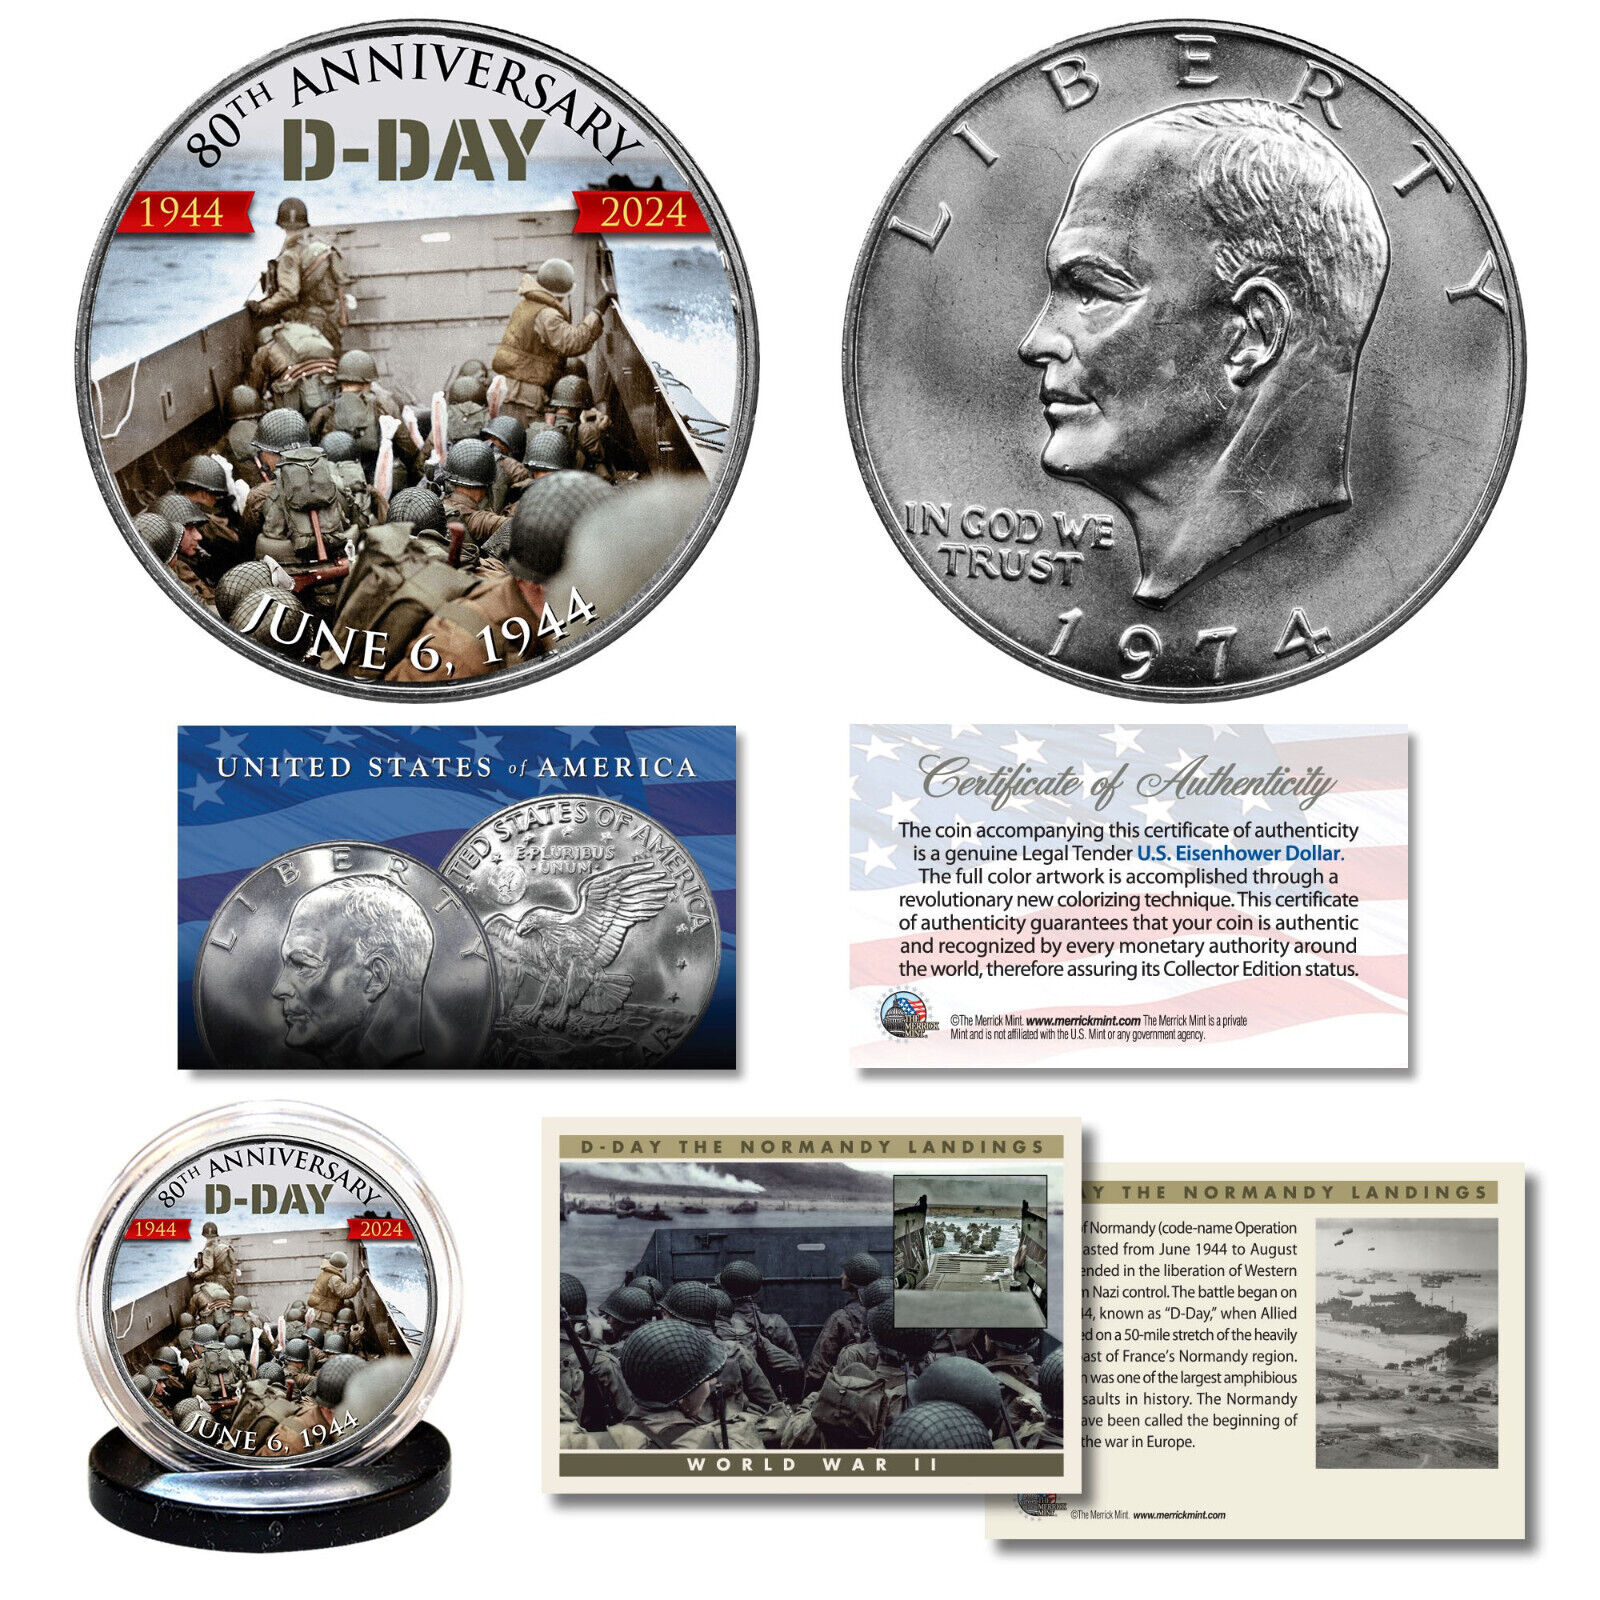 WWII D-DAY Normandy 80th Anniversary 1944-2024 IKE U.S. $1 Coin & Trading Card